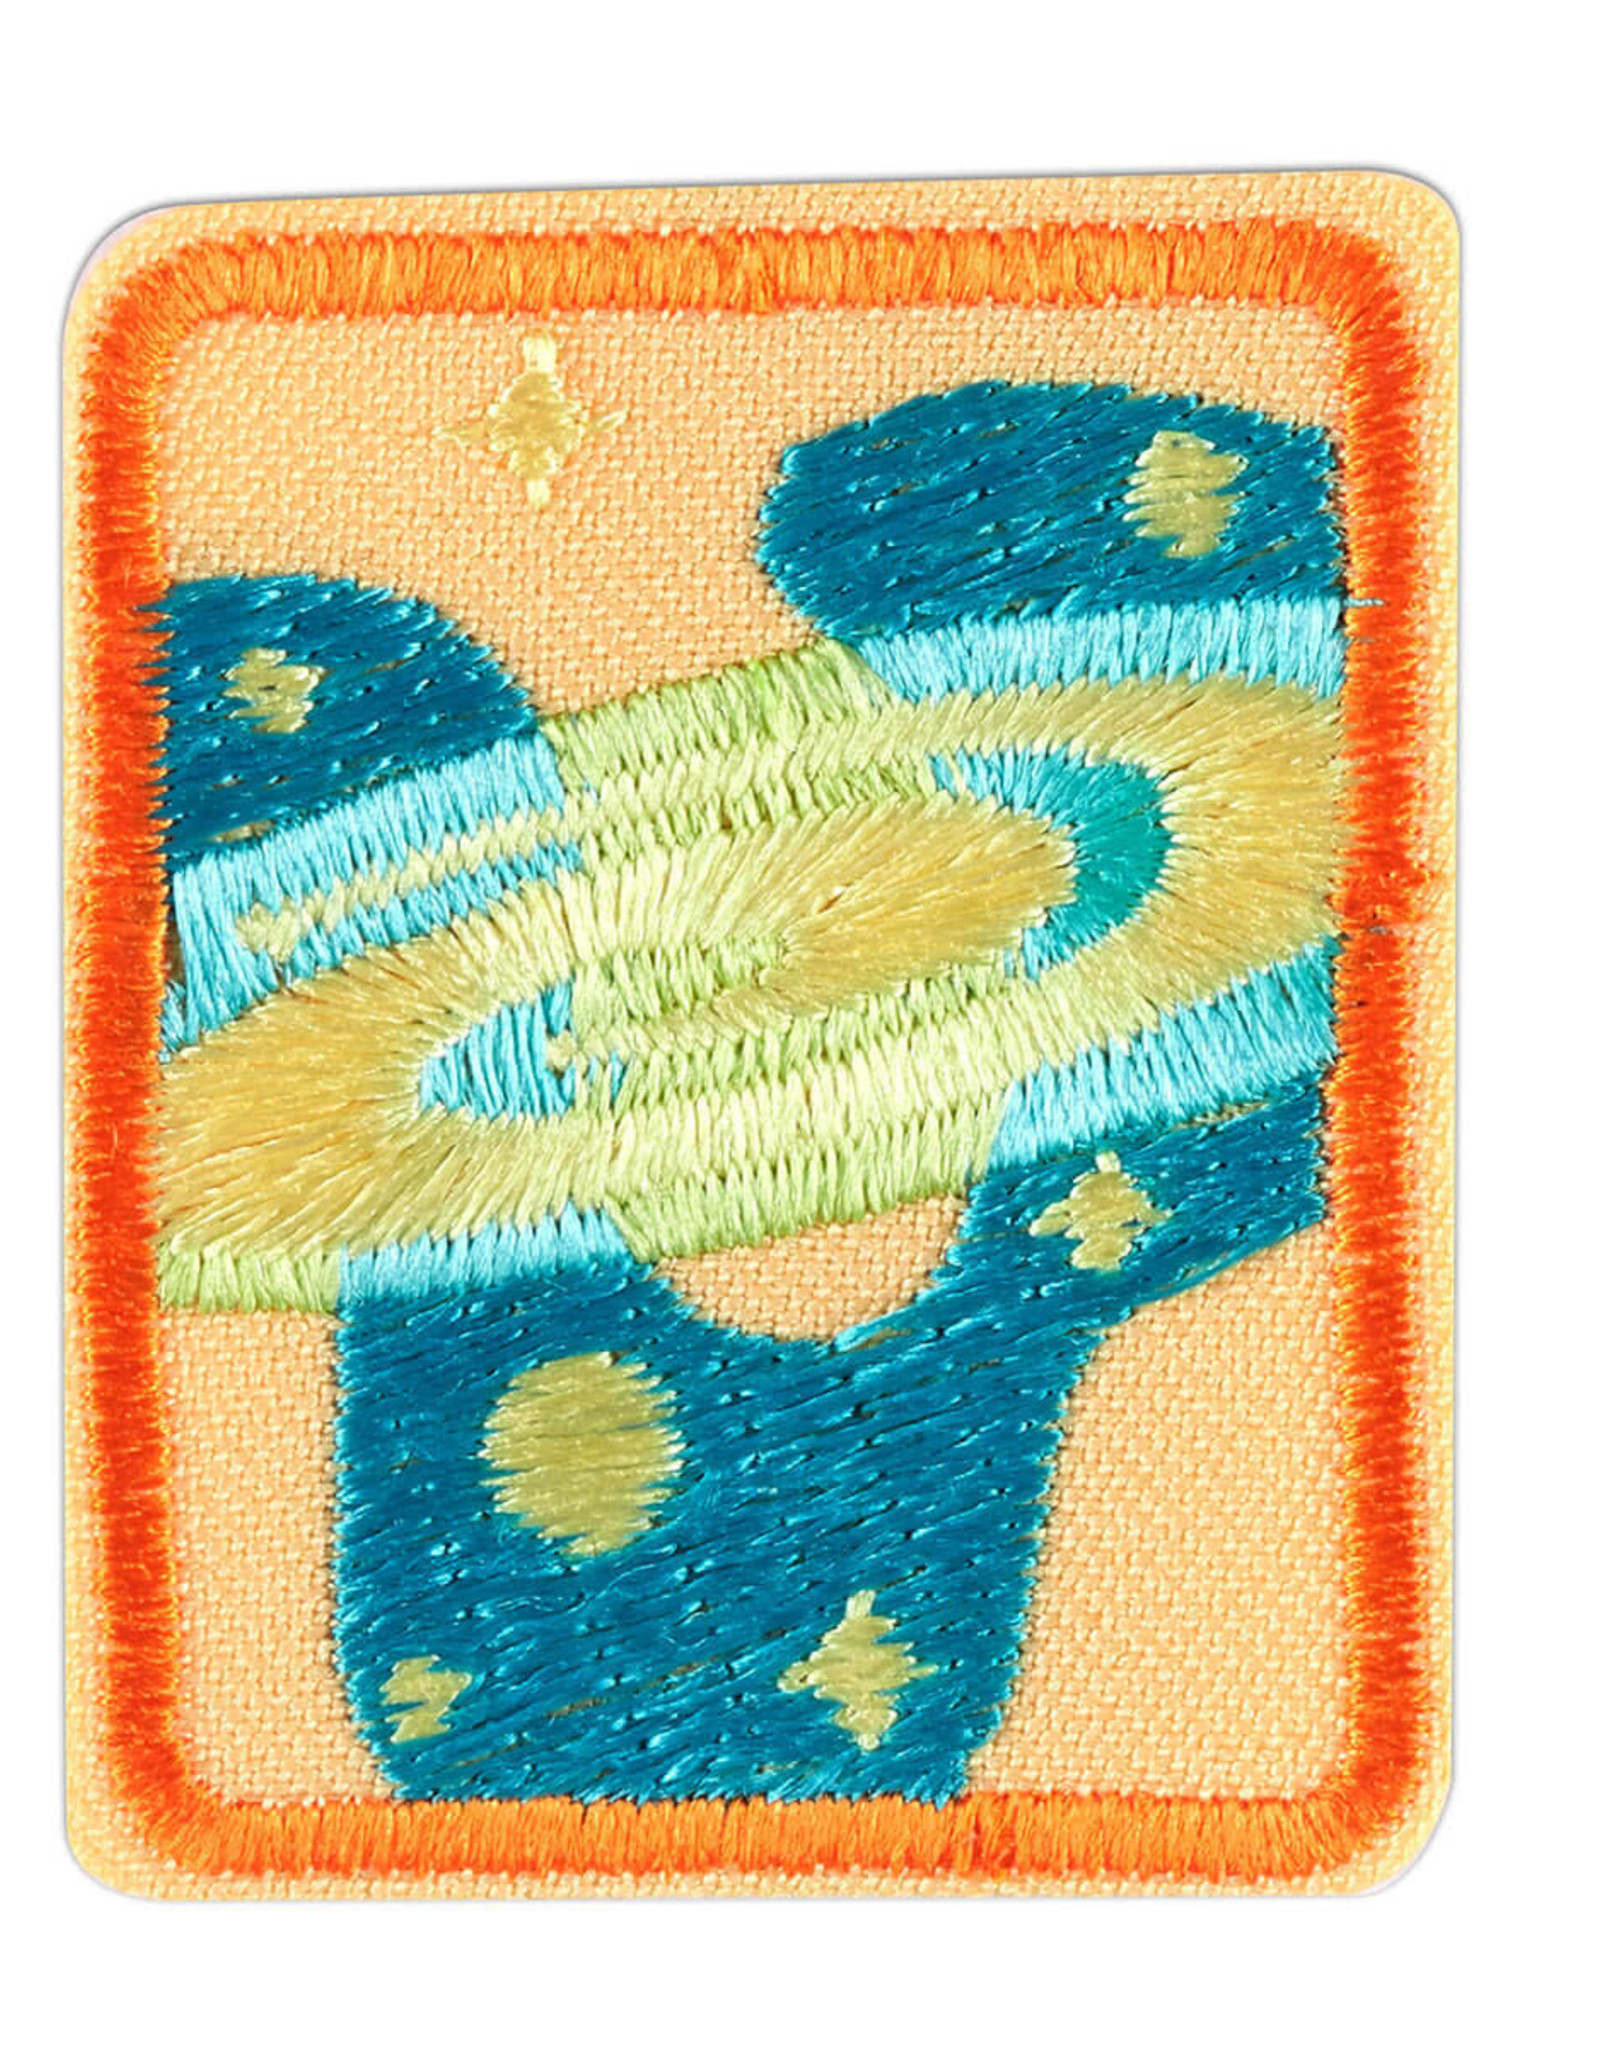 GIRL SCOUTS OF THE USA Senior Space Science Expert Badge